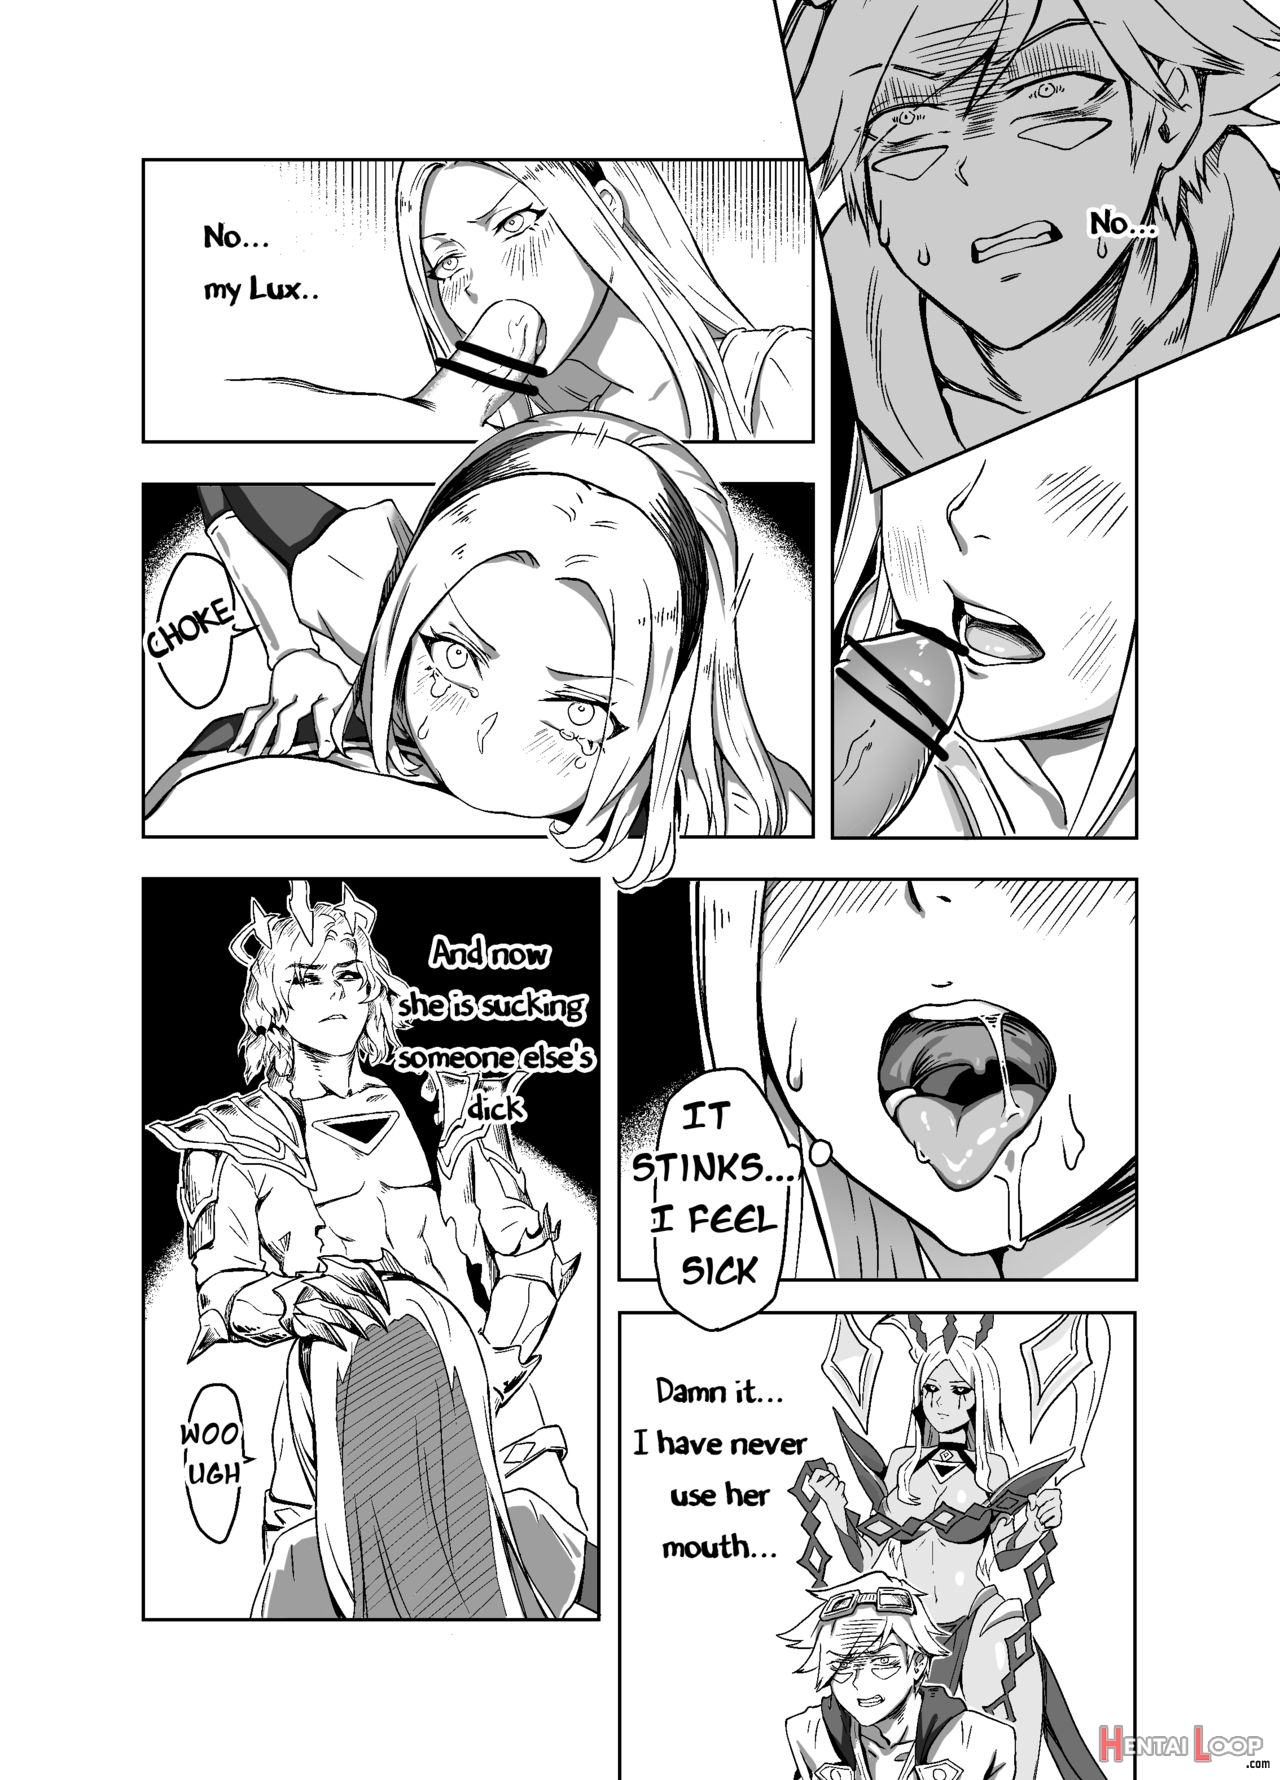 Lux X Viego Ft. Ezreal page 10